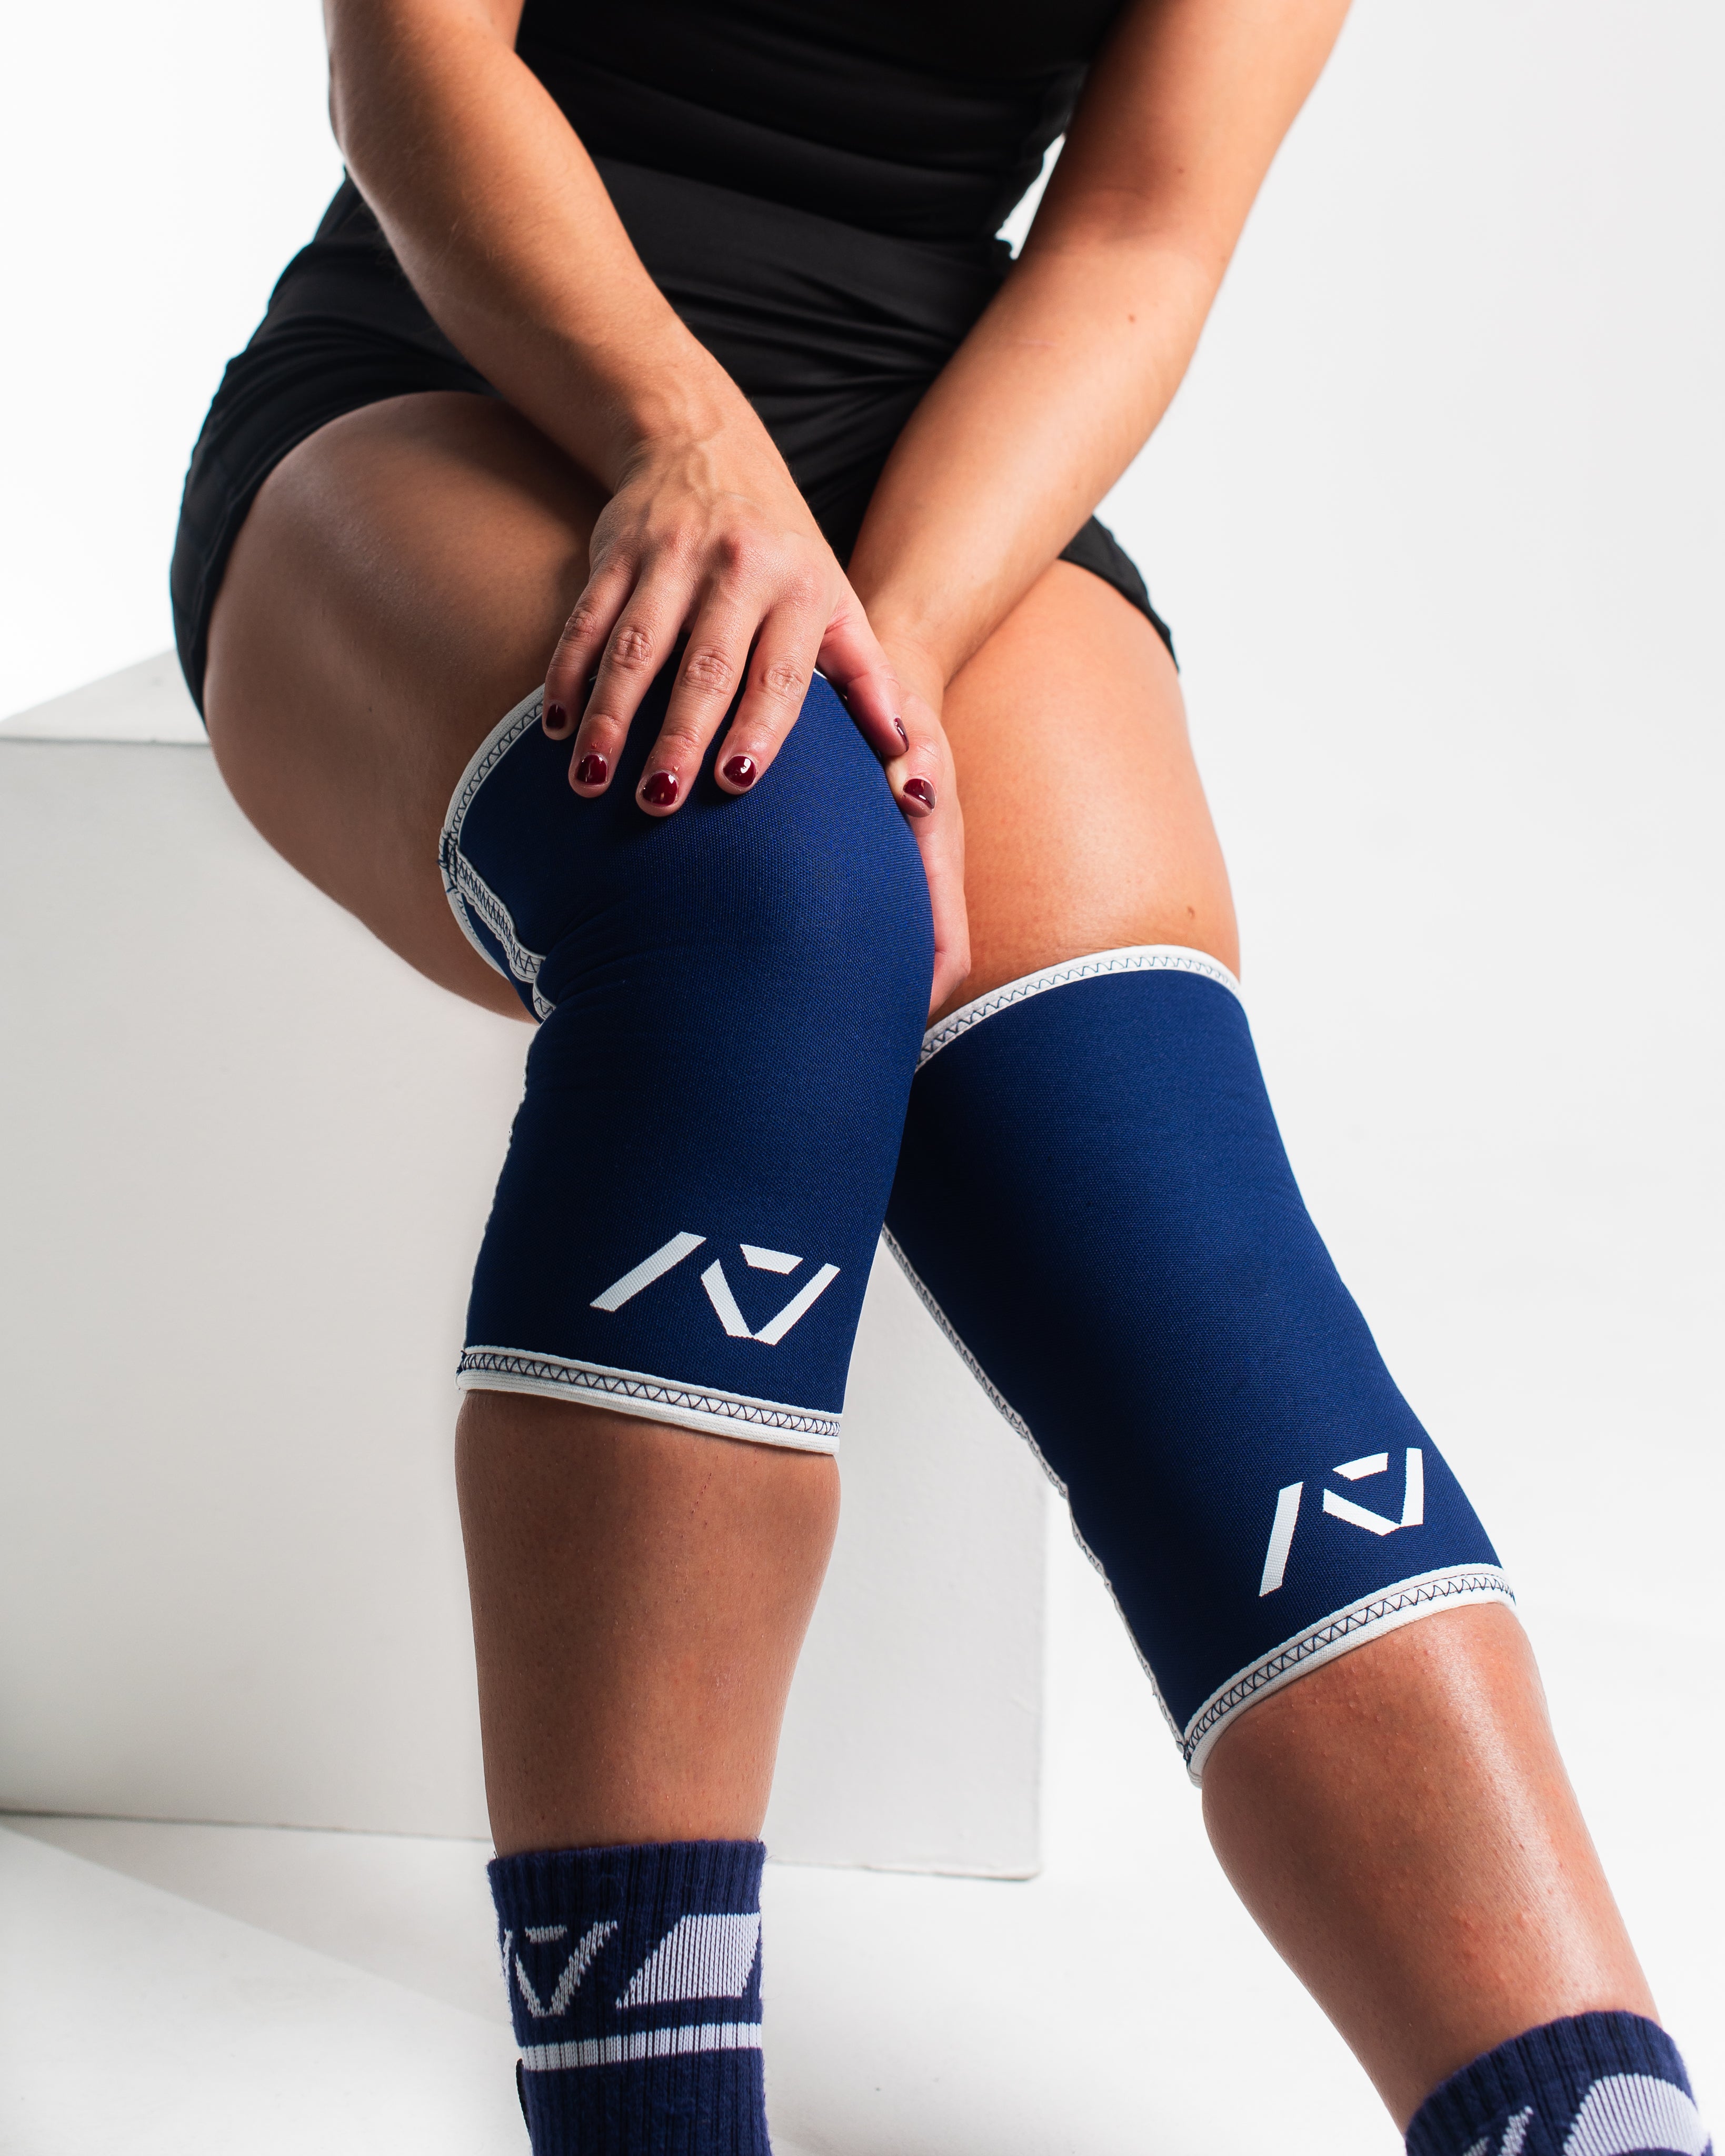 Hourglass Knee Sleeves - IPF Approved - Night Light